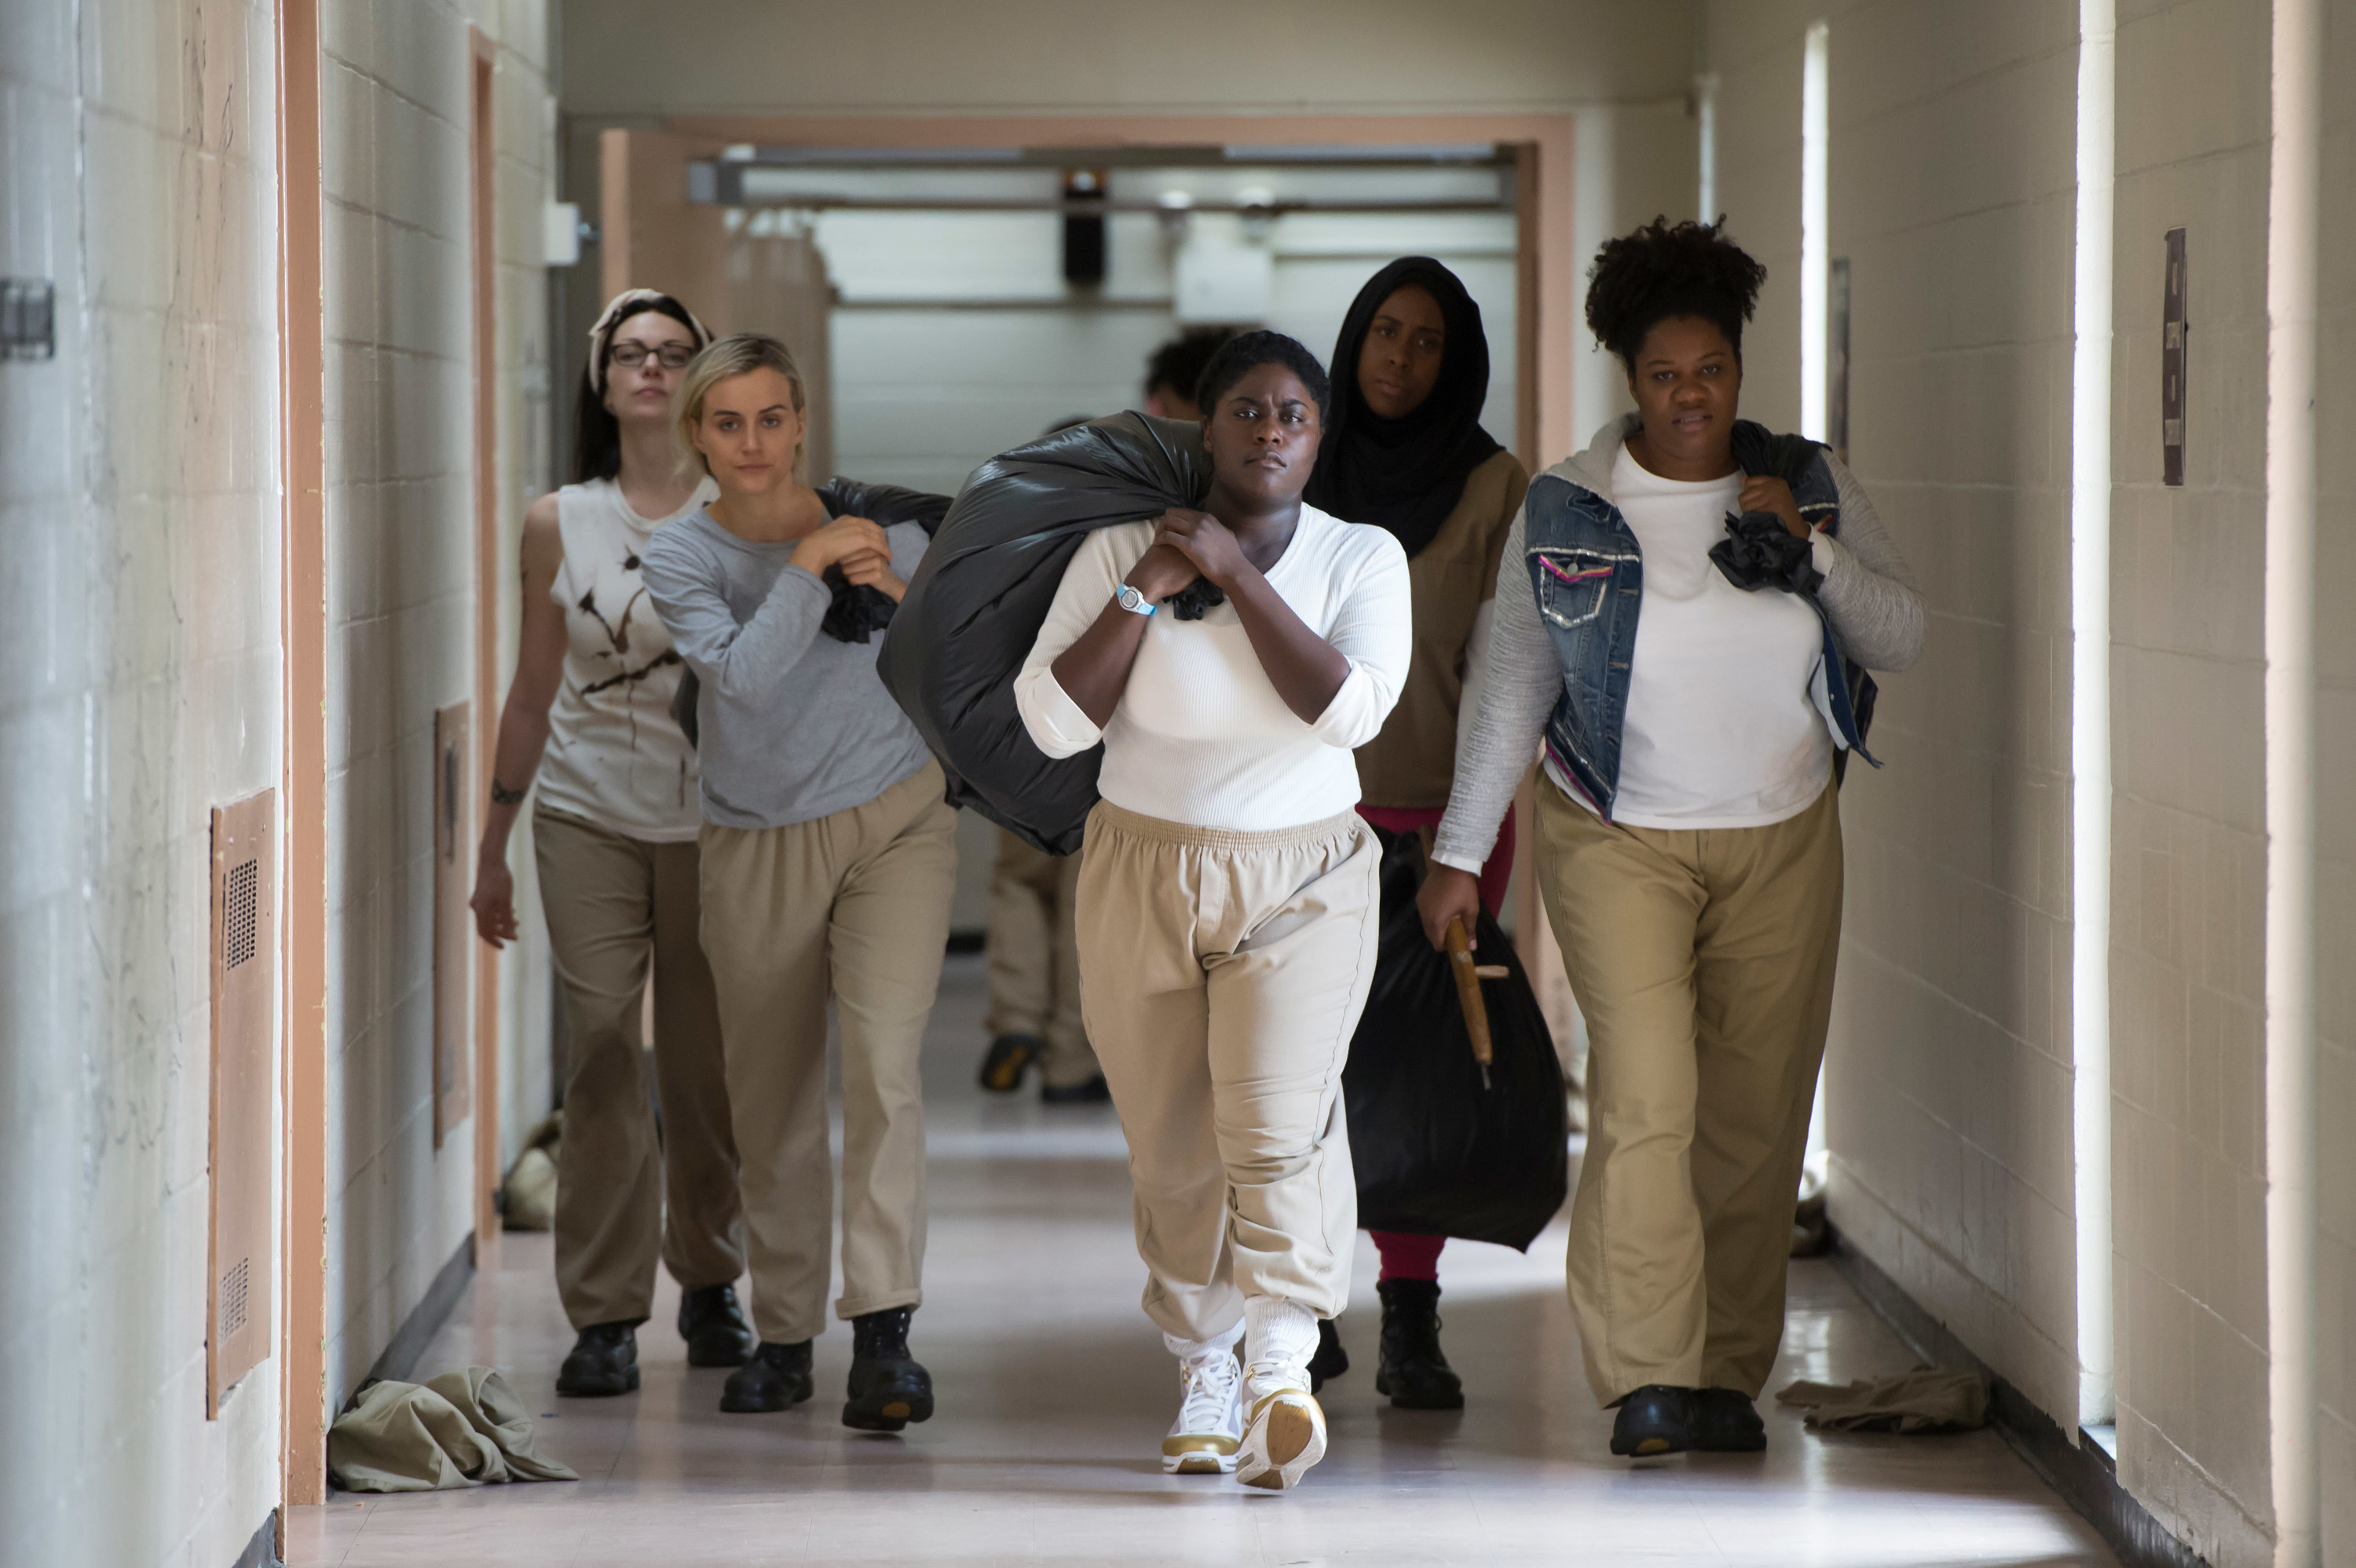 Screenshot from &quot;Orange Is the New Black&quot;